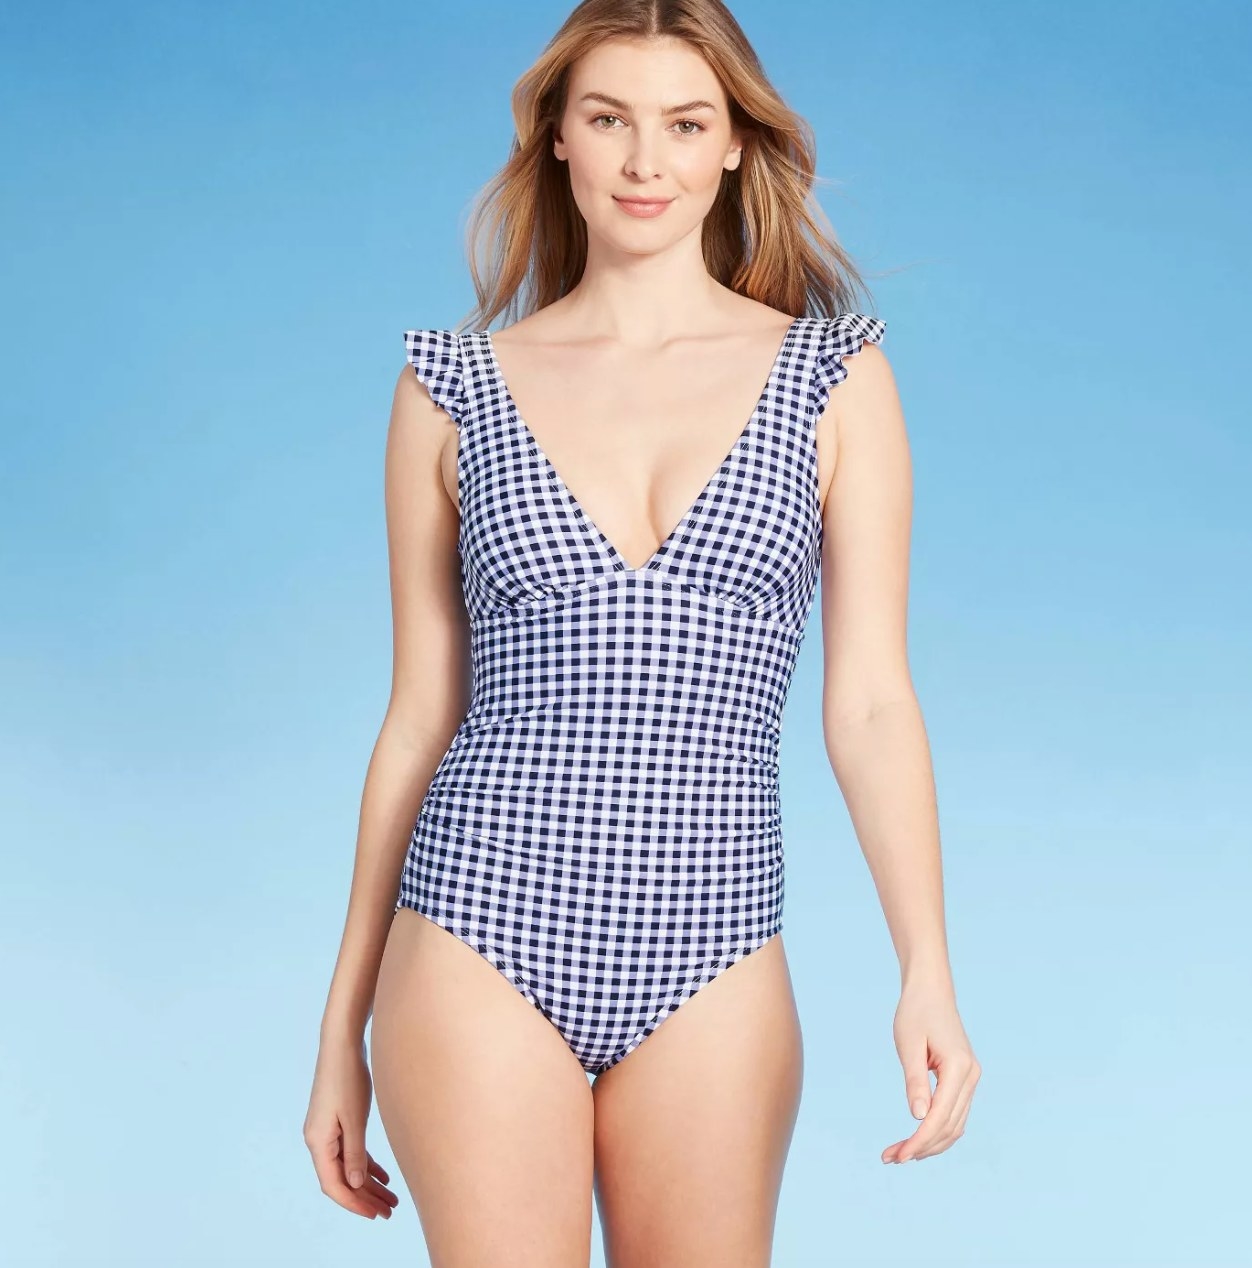 model wearing the white and blue gingham suit